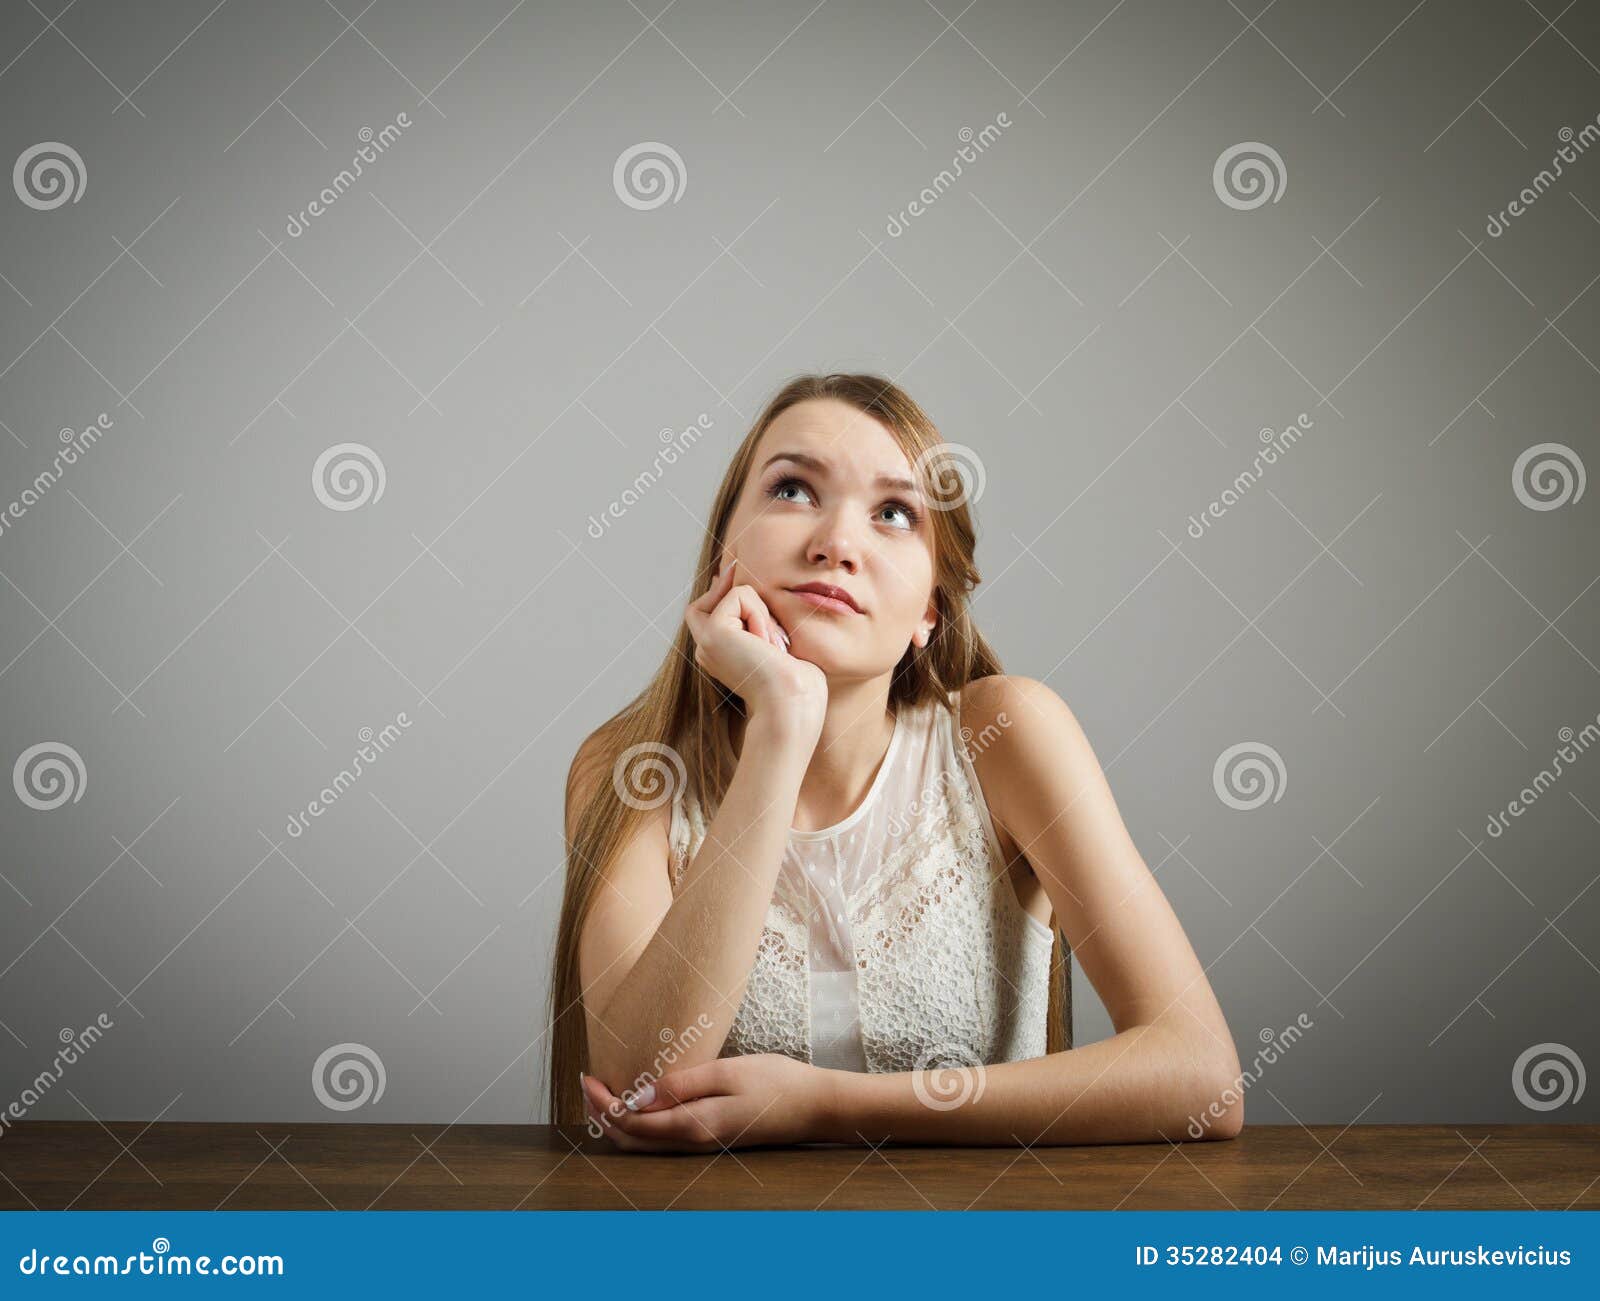 Girl in white is thinking stock photo. Image of concept - 35282404